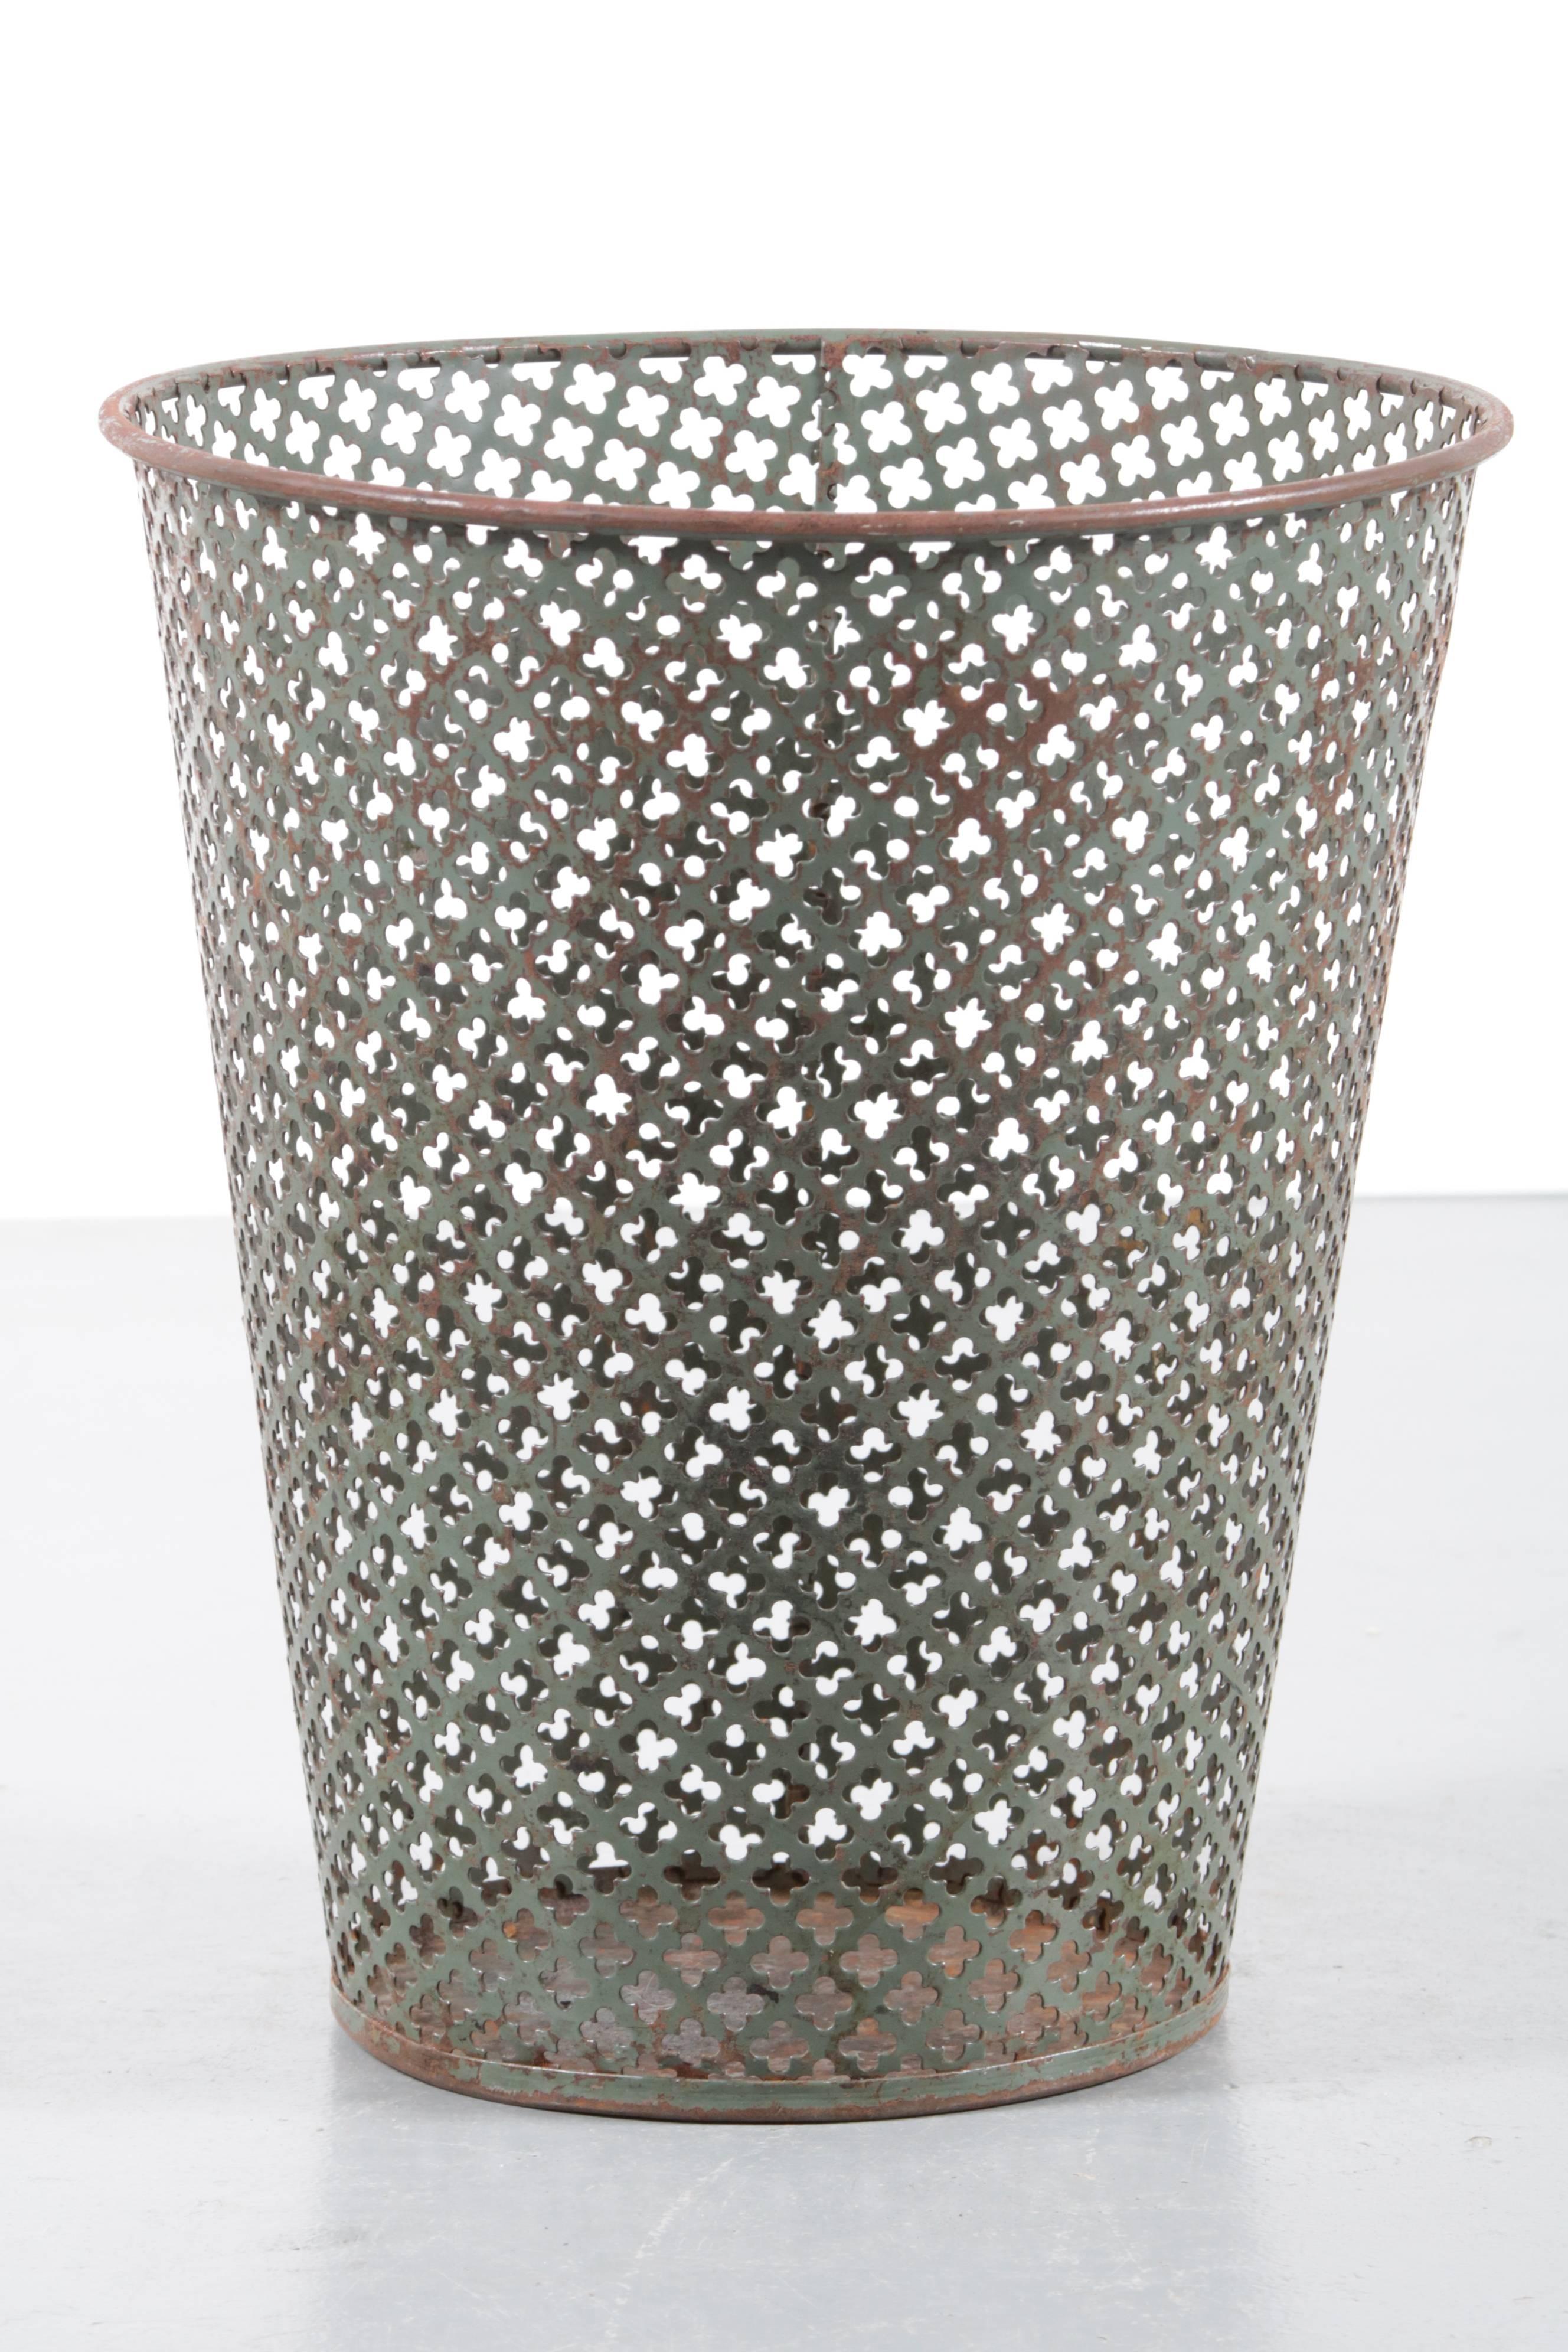 A rare trash bin / paper basket designed by Mathieu Matégot, manufactured by Ateliers Matégot in France in the 1950s.

We have several in stock, which is a very unique find! The bins are made of high quality perforated metal, making them iconic